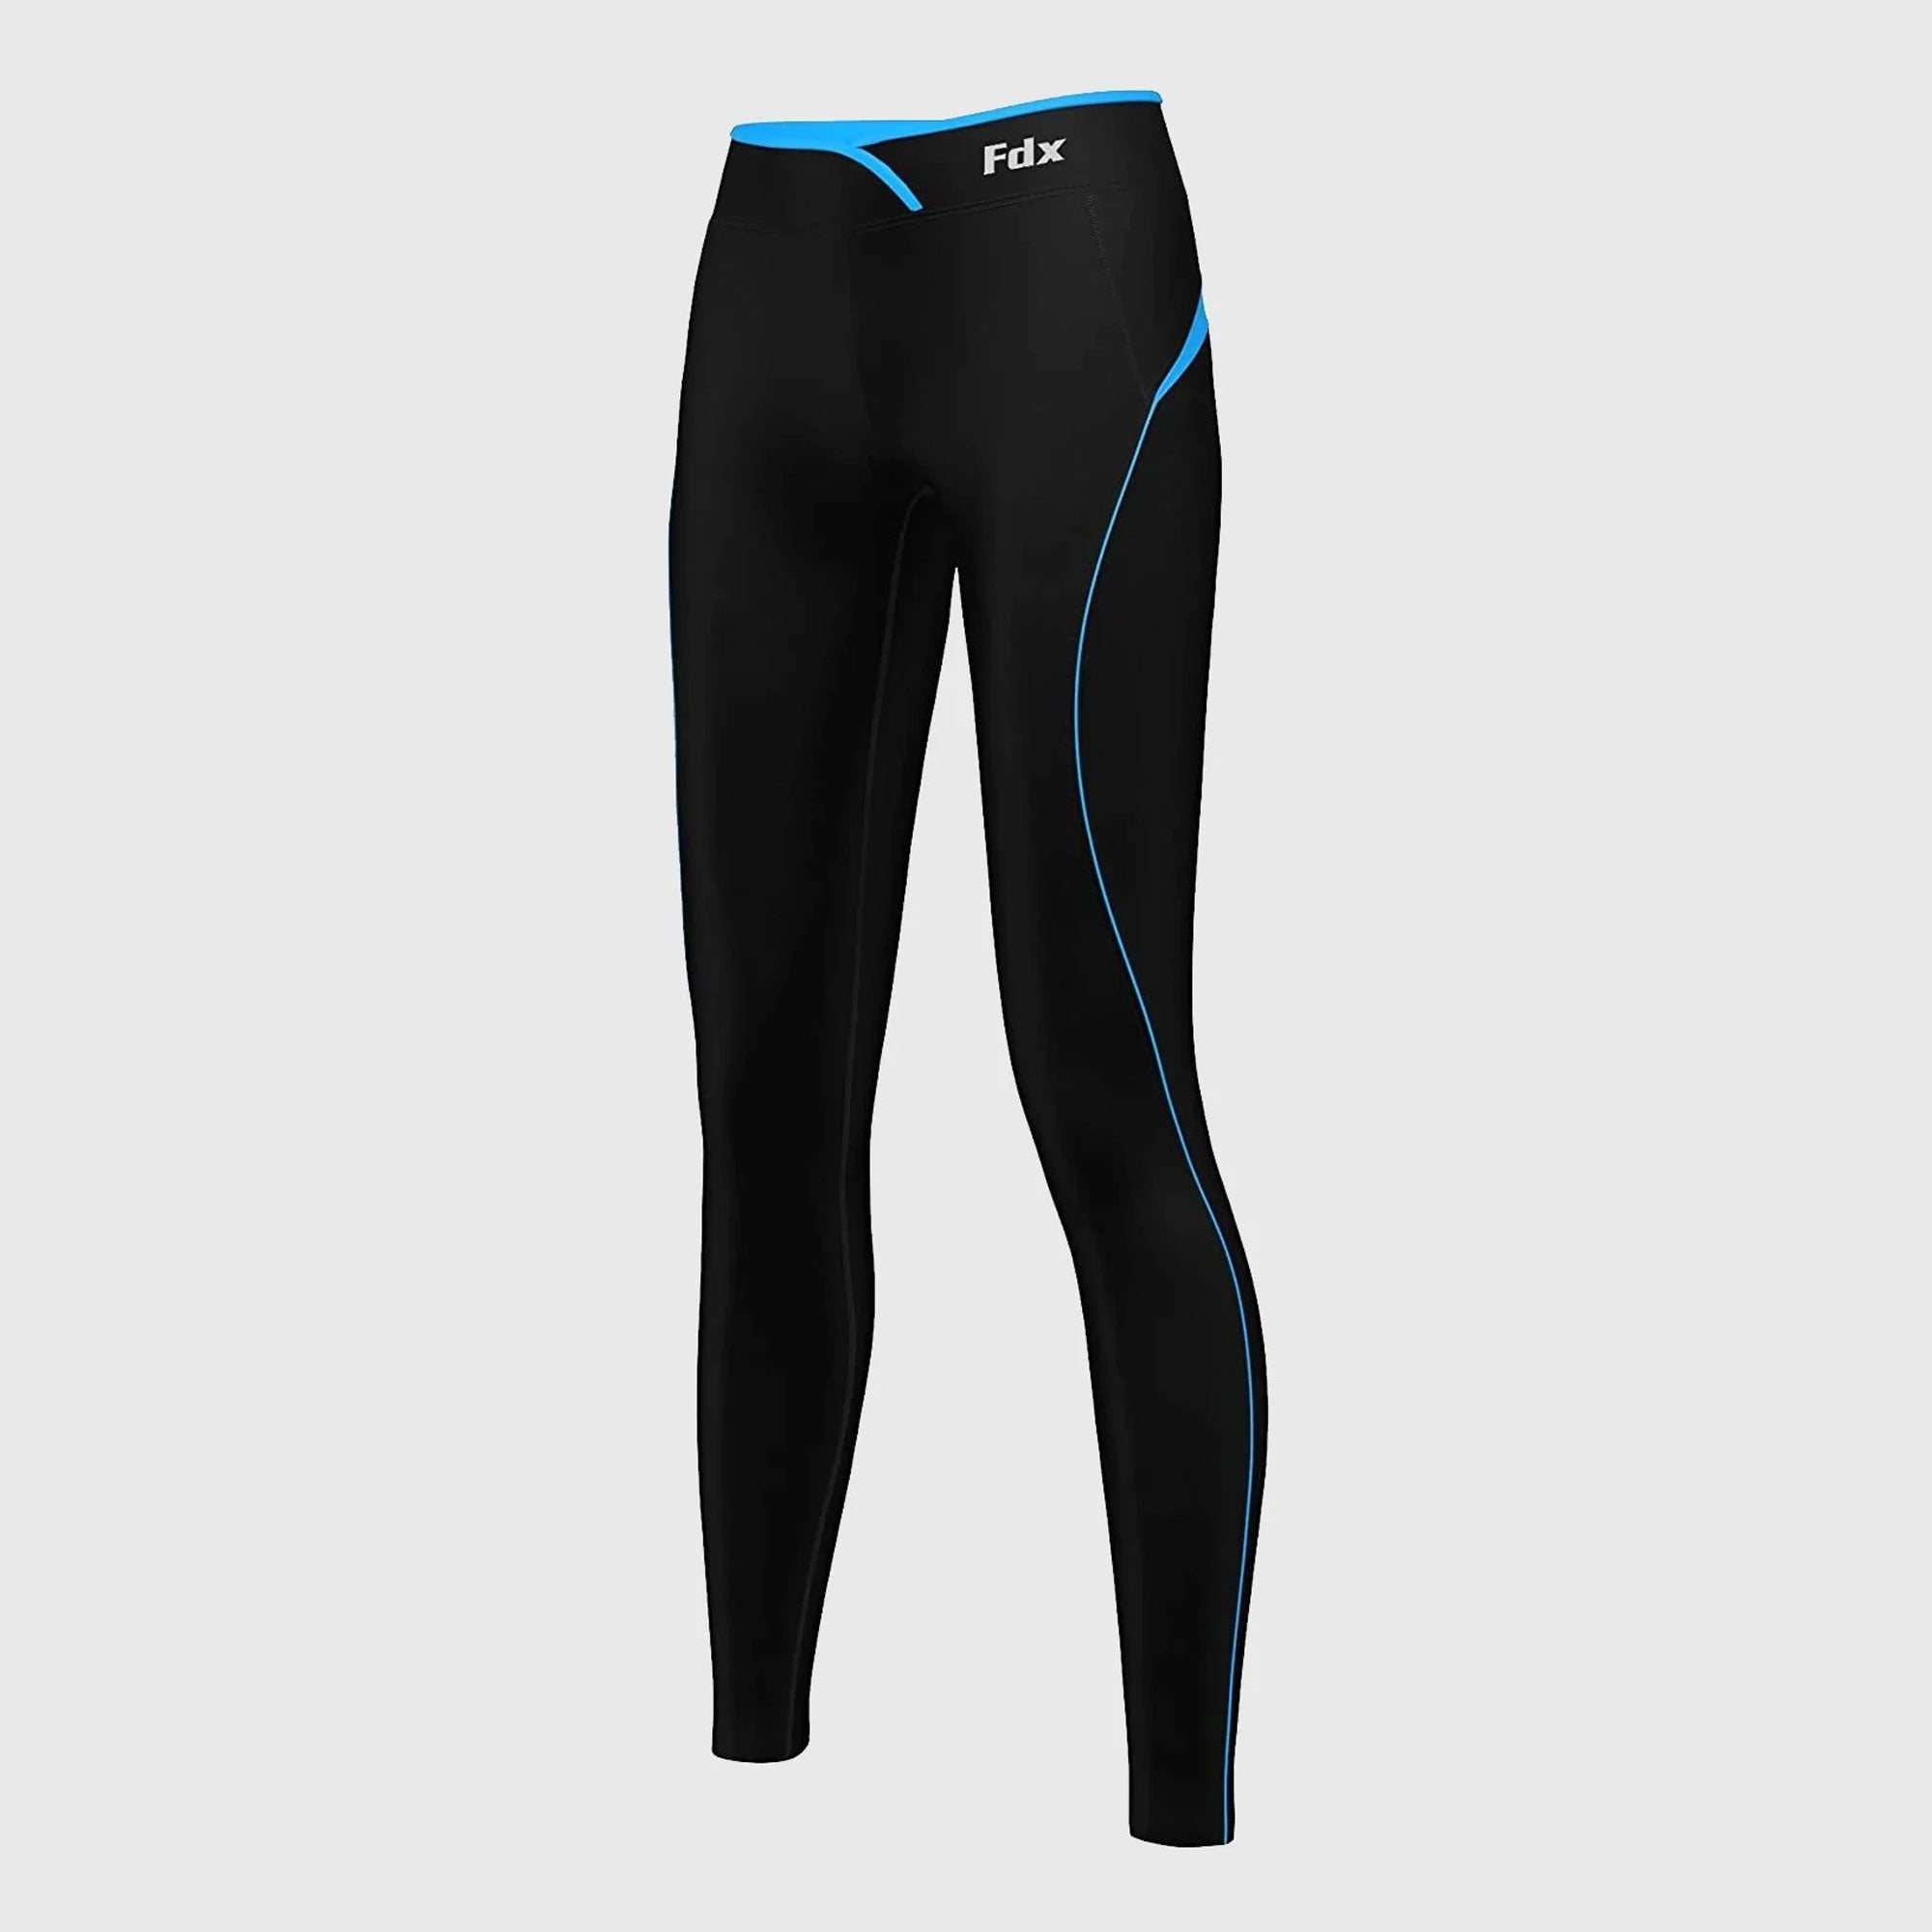 Fdx Black & Sky Blue Compression Tights Leggings Gym Workout Running Athletic Yoga Elastic Waistband Strechable Breathable Training Jogging Pants - P2